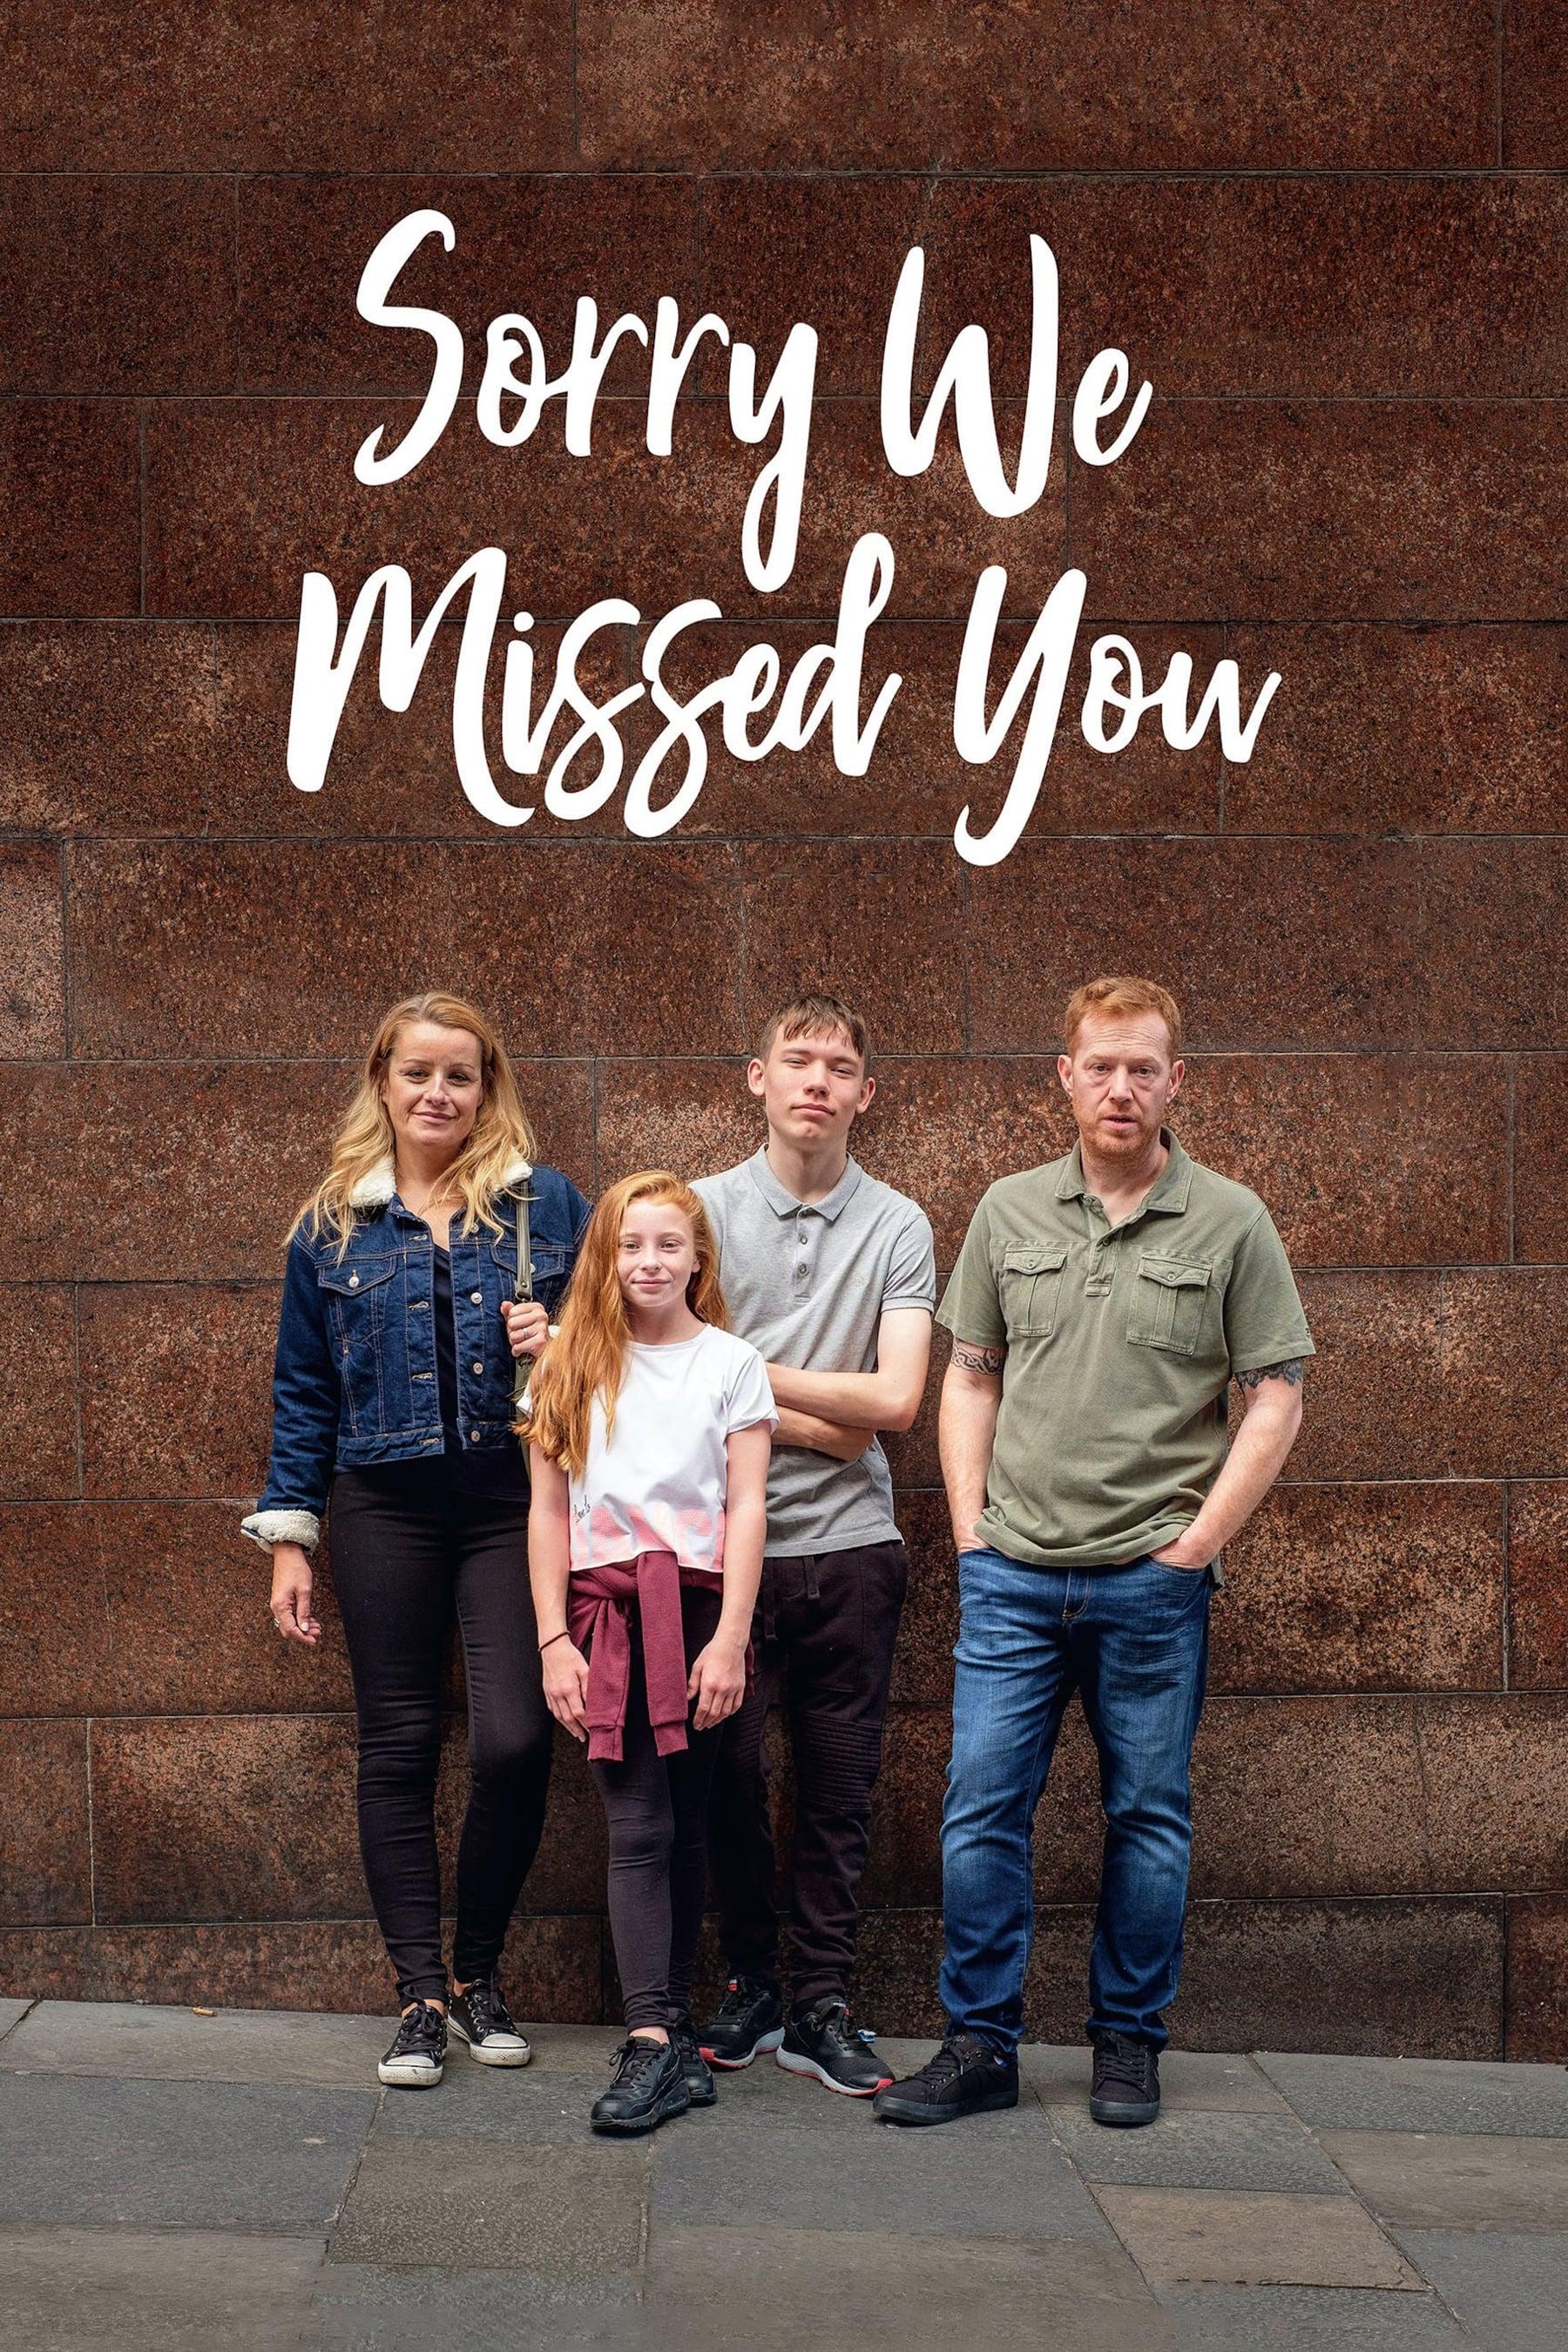 Sorry We Missed You poster